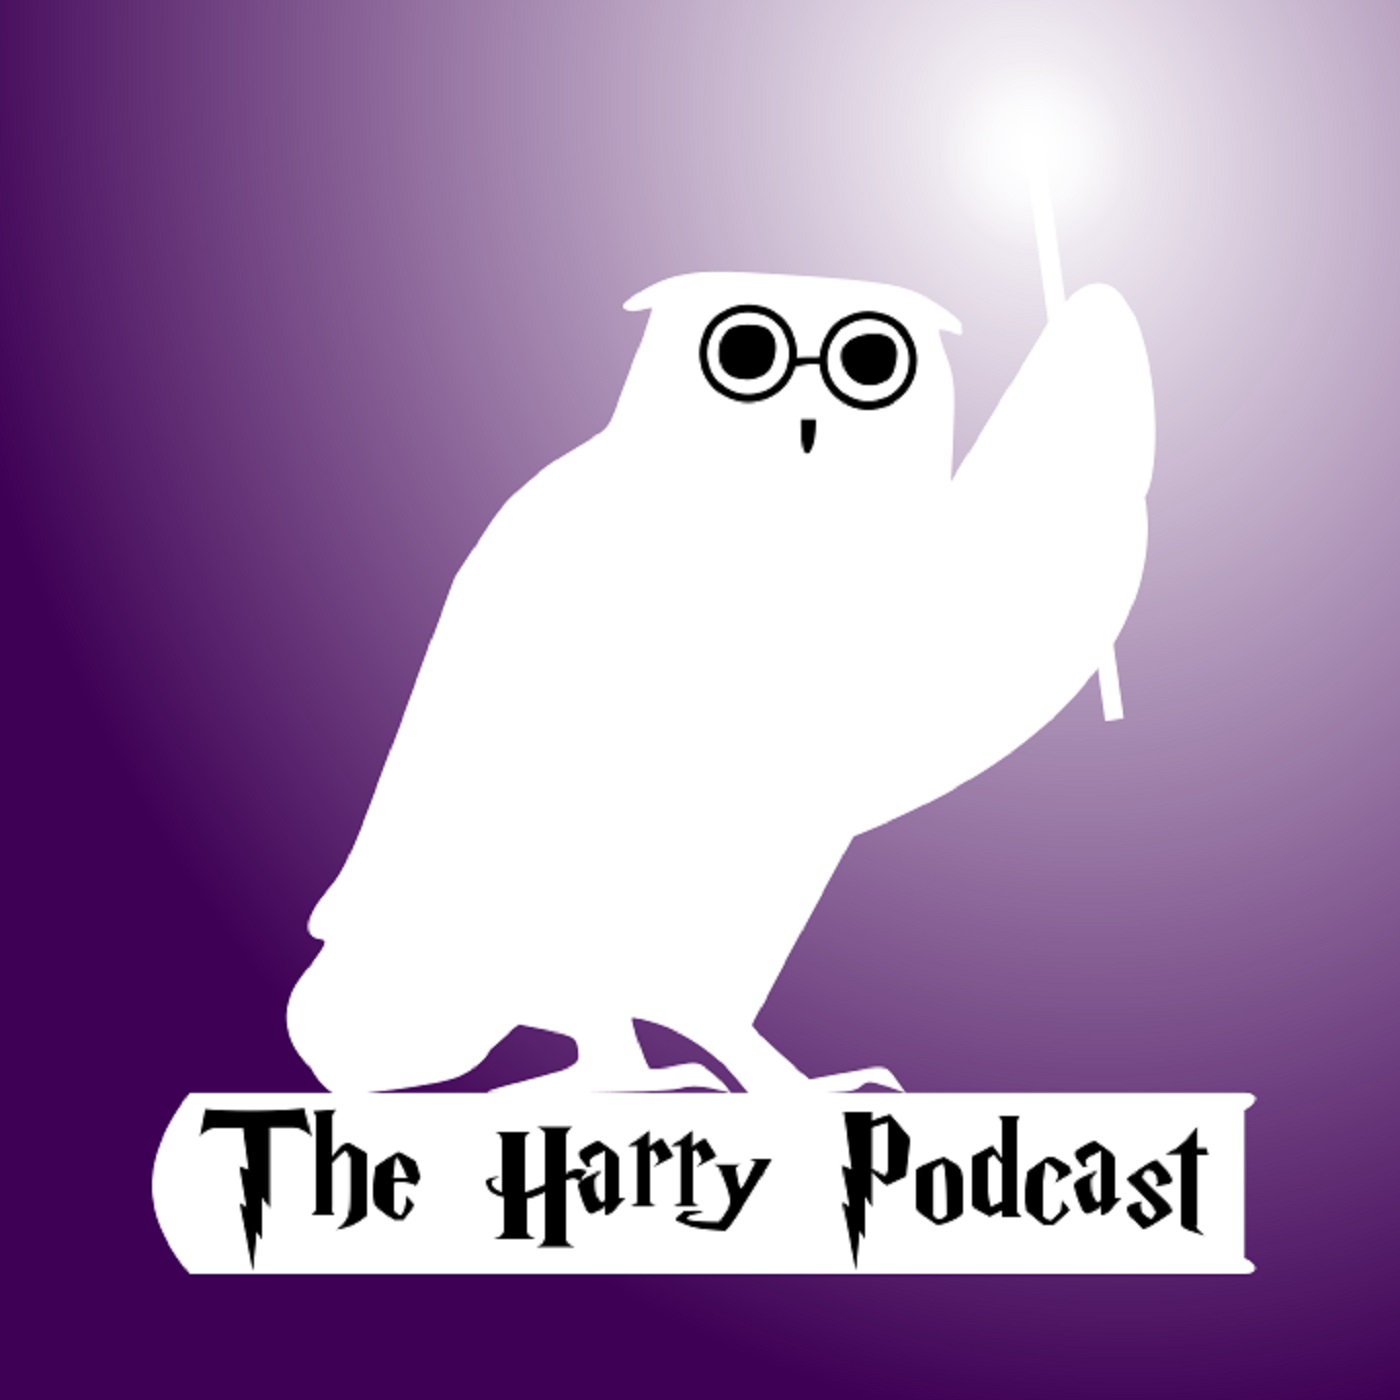 Episode 0: Harry Podcast and the Introduction